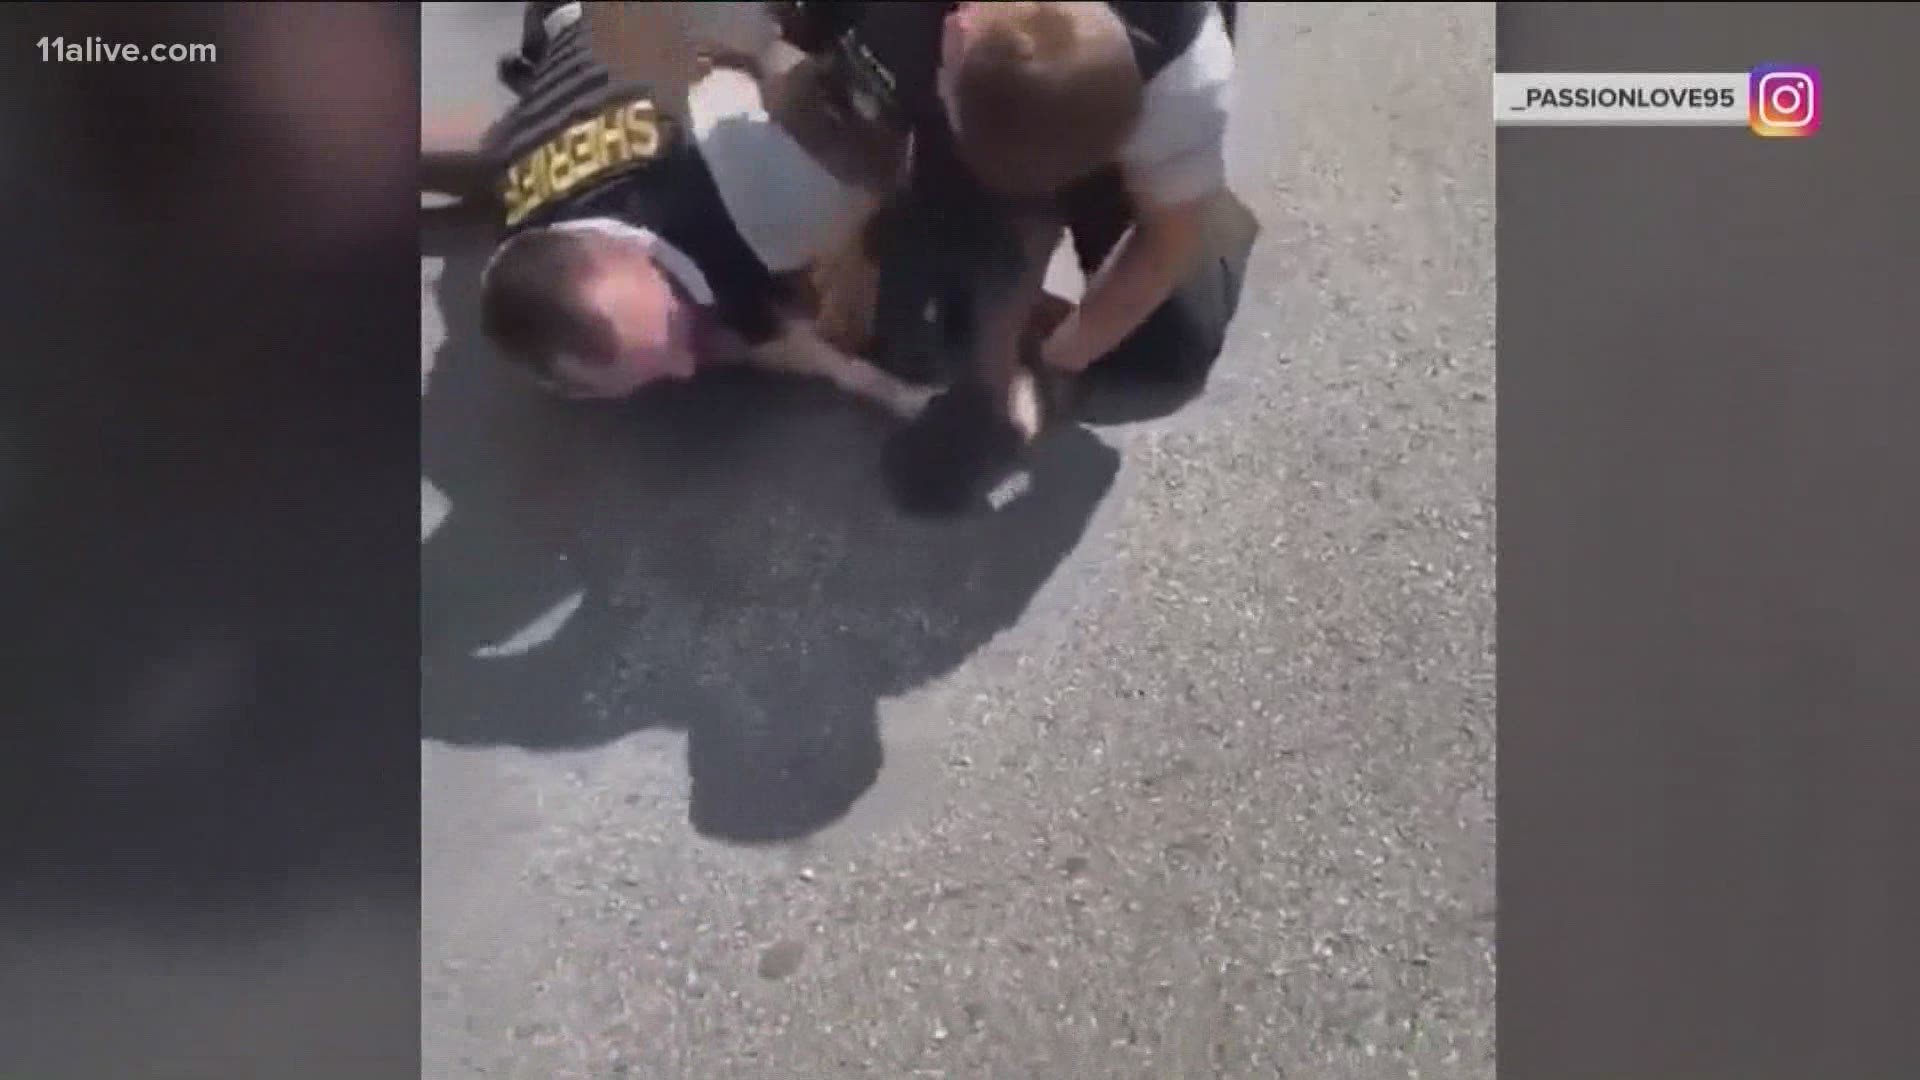 The arrest of Roderick Walker was caught on video last week in Clayton County.